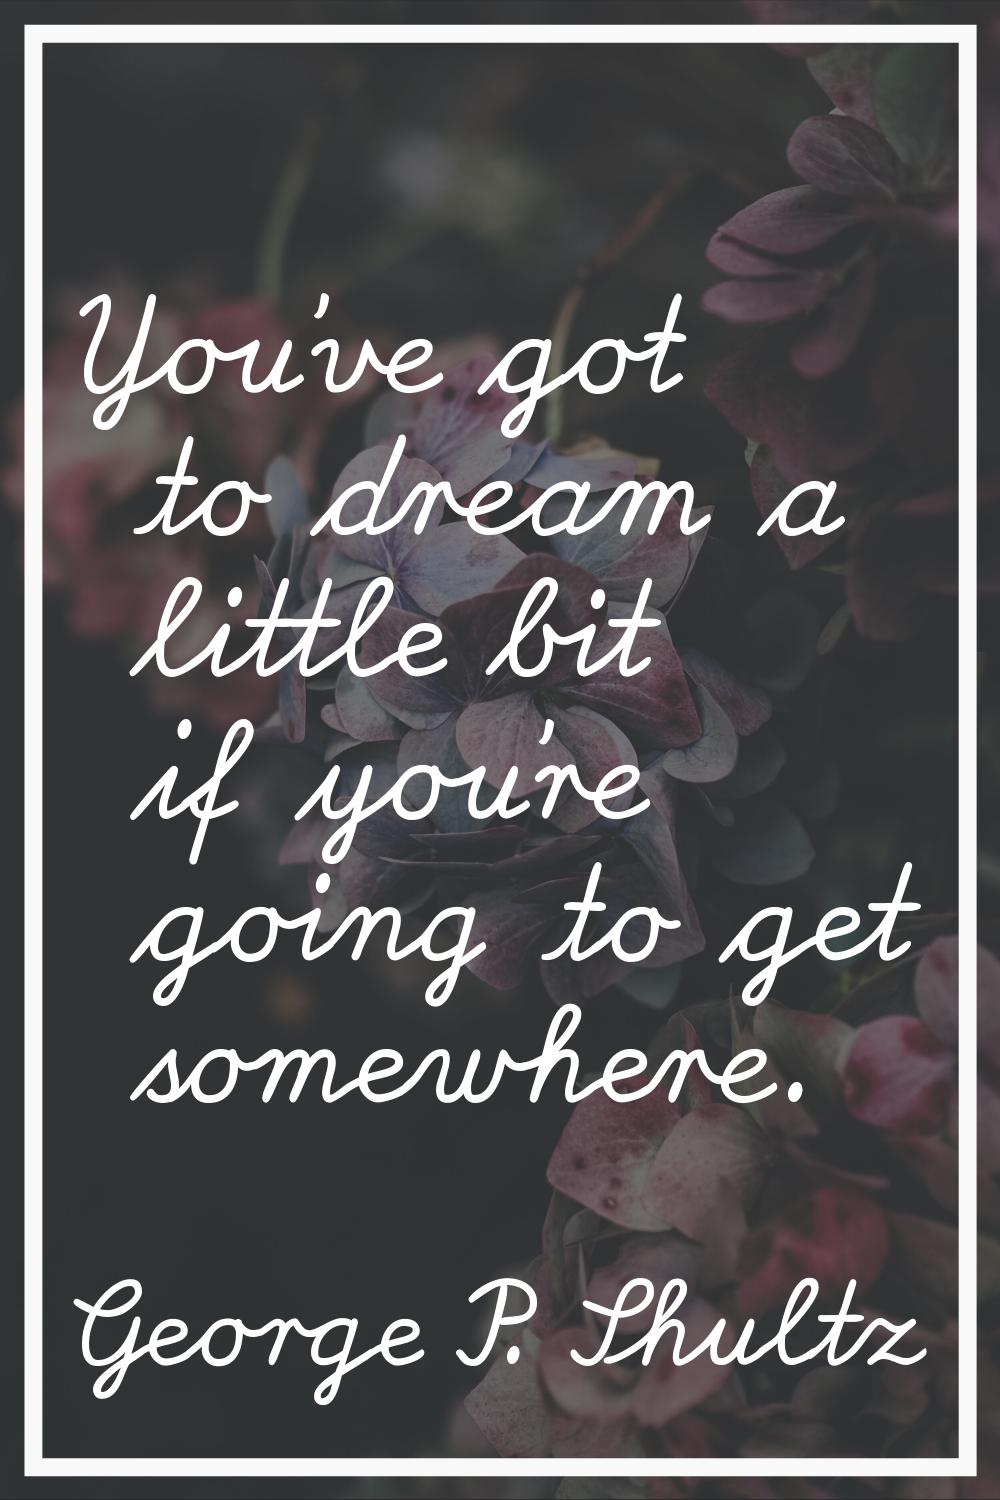 You've got to dream a little bit if you're going to get somewhere.